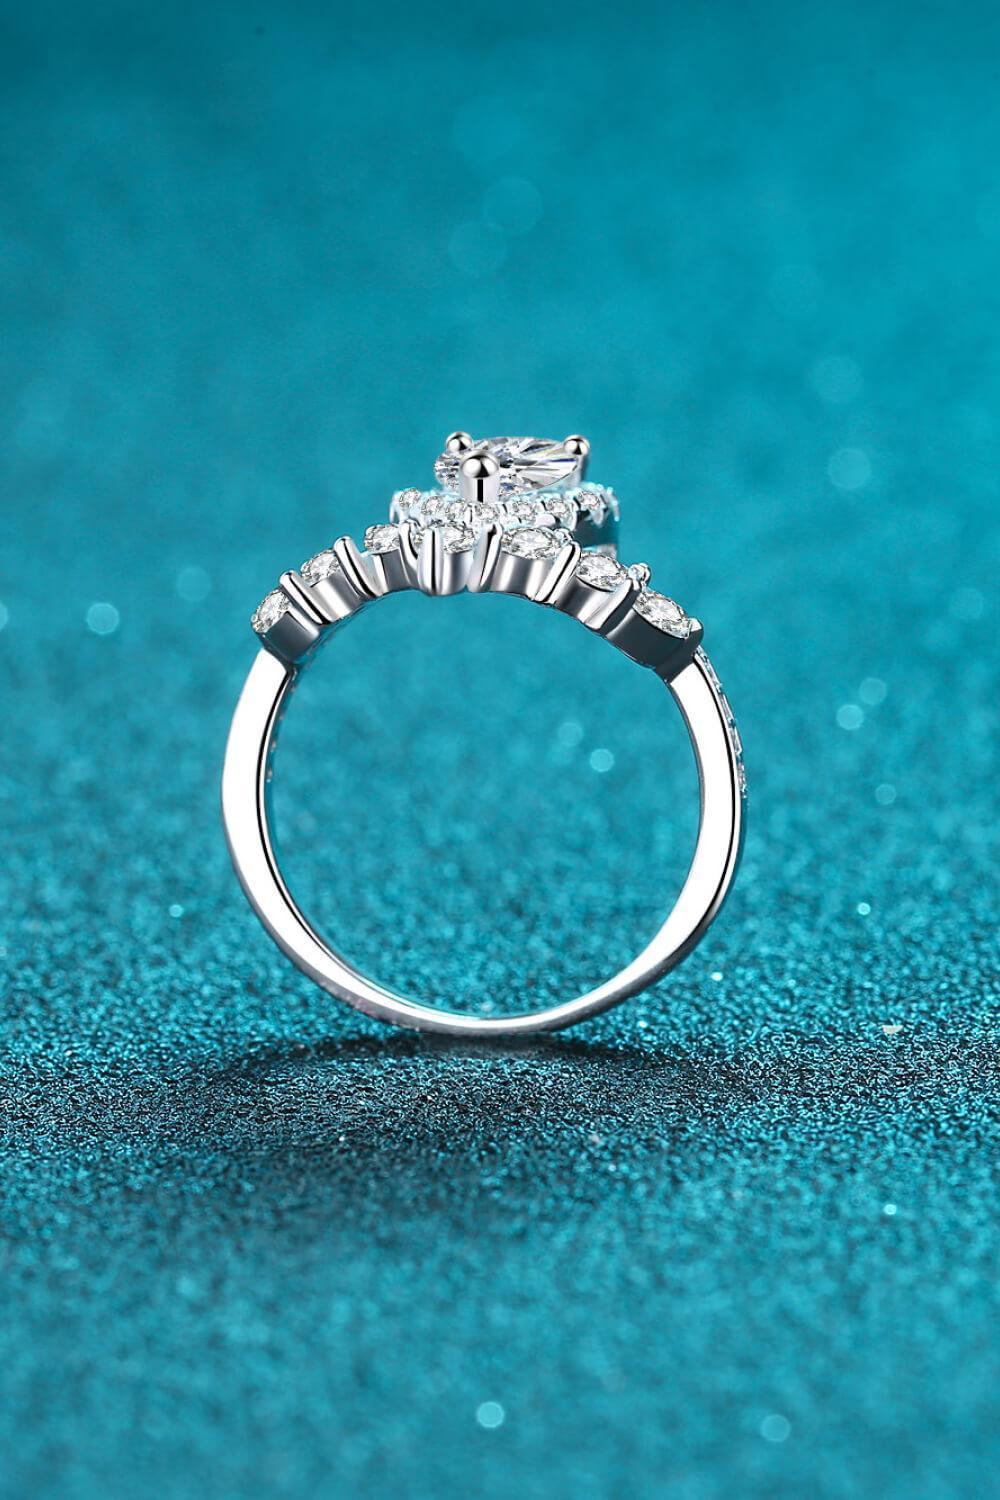 Flawlessly Created Sterling Silver 1 Carat Moissanite Ring - MXSTUDIO.COM